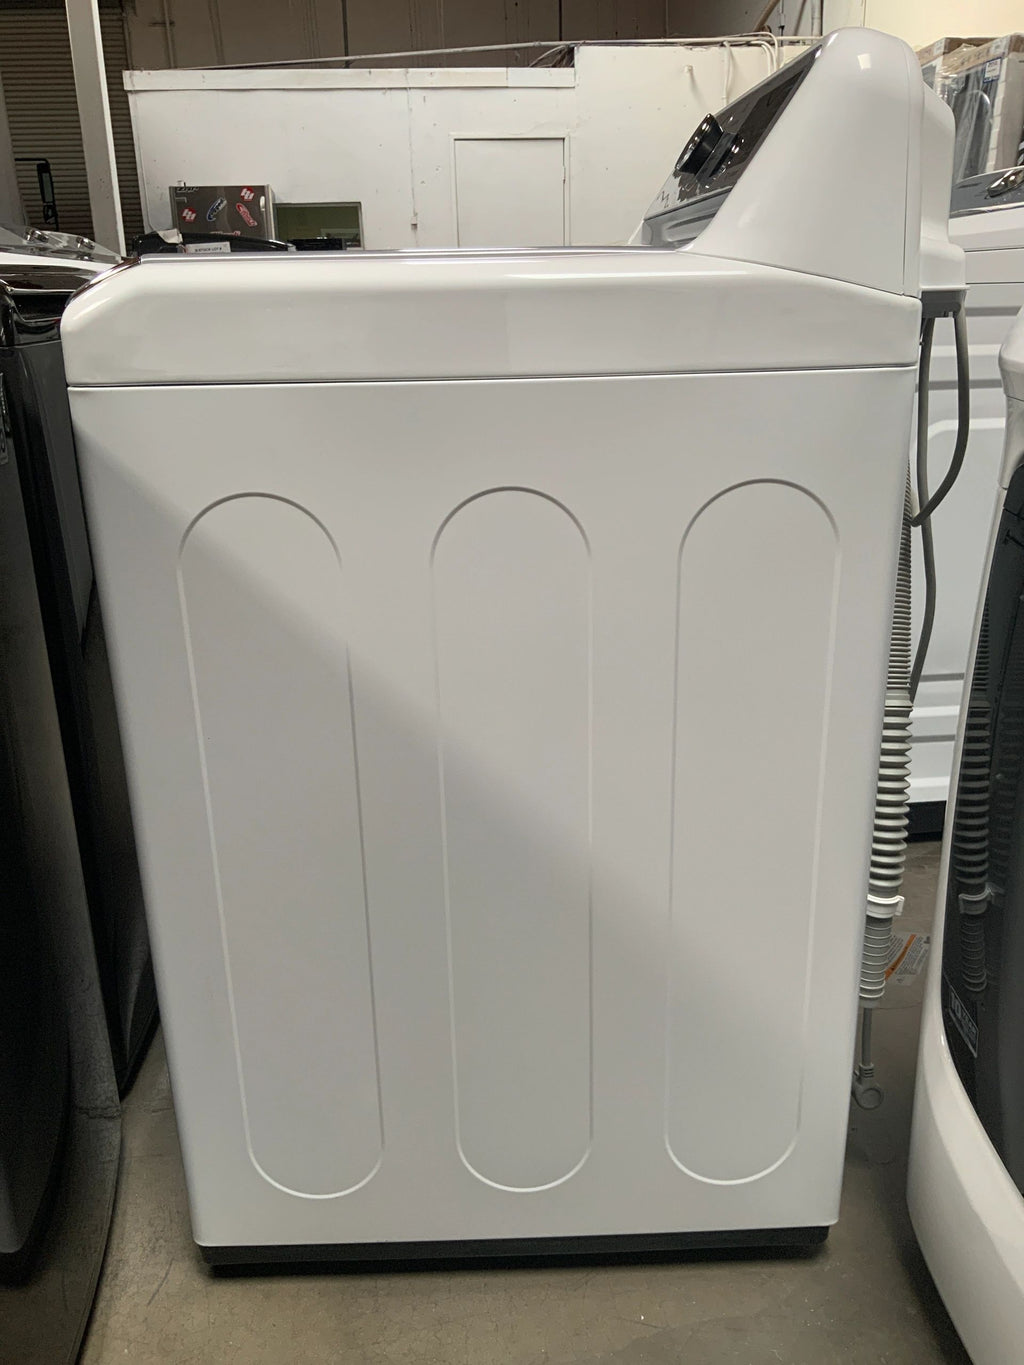 New Open Box. 27 in. 4.8 cu. ft. Mega Capacity White Top Load Washer, Agitator, with TurboWash3D and Wi-Fi Connectivity. Model: WT7305CW